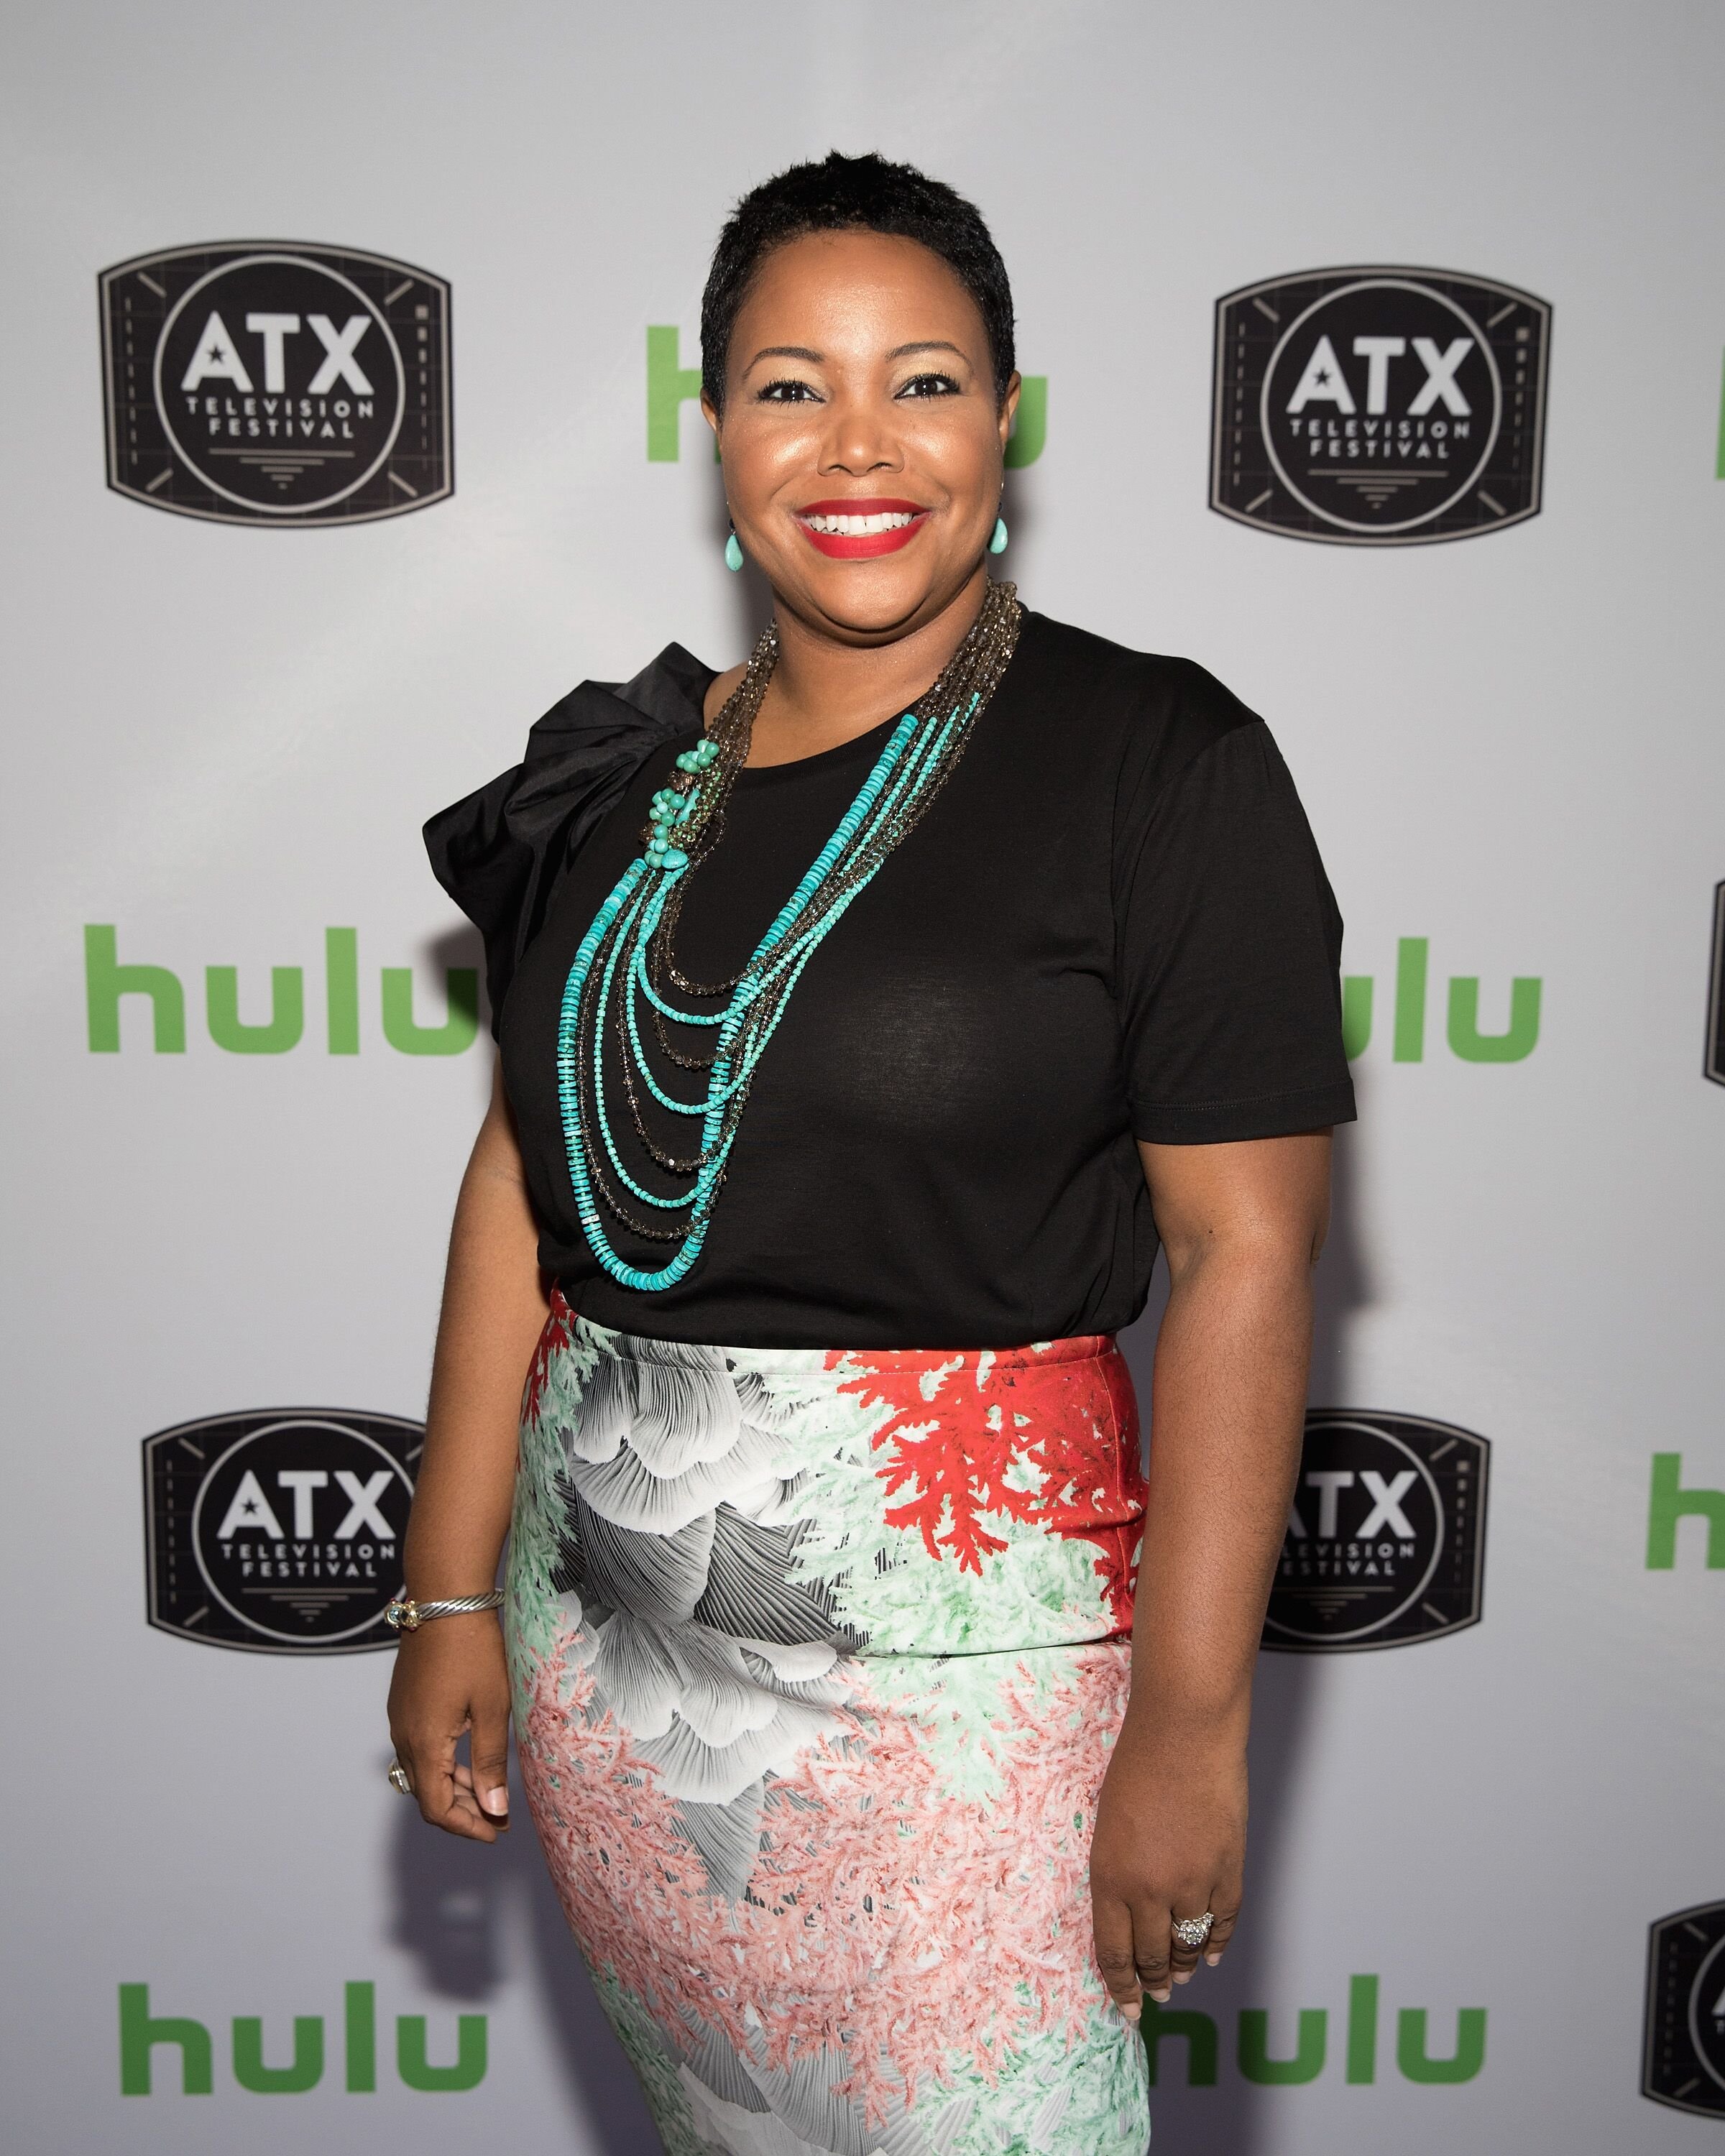 Kellie Shanygne Williams visits the Hulu Badgeholder Lounge during the ATX Television Festival on June 8, 2018 in Austin, Texas | Photo: Getty Images